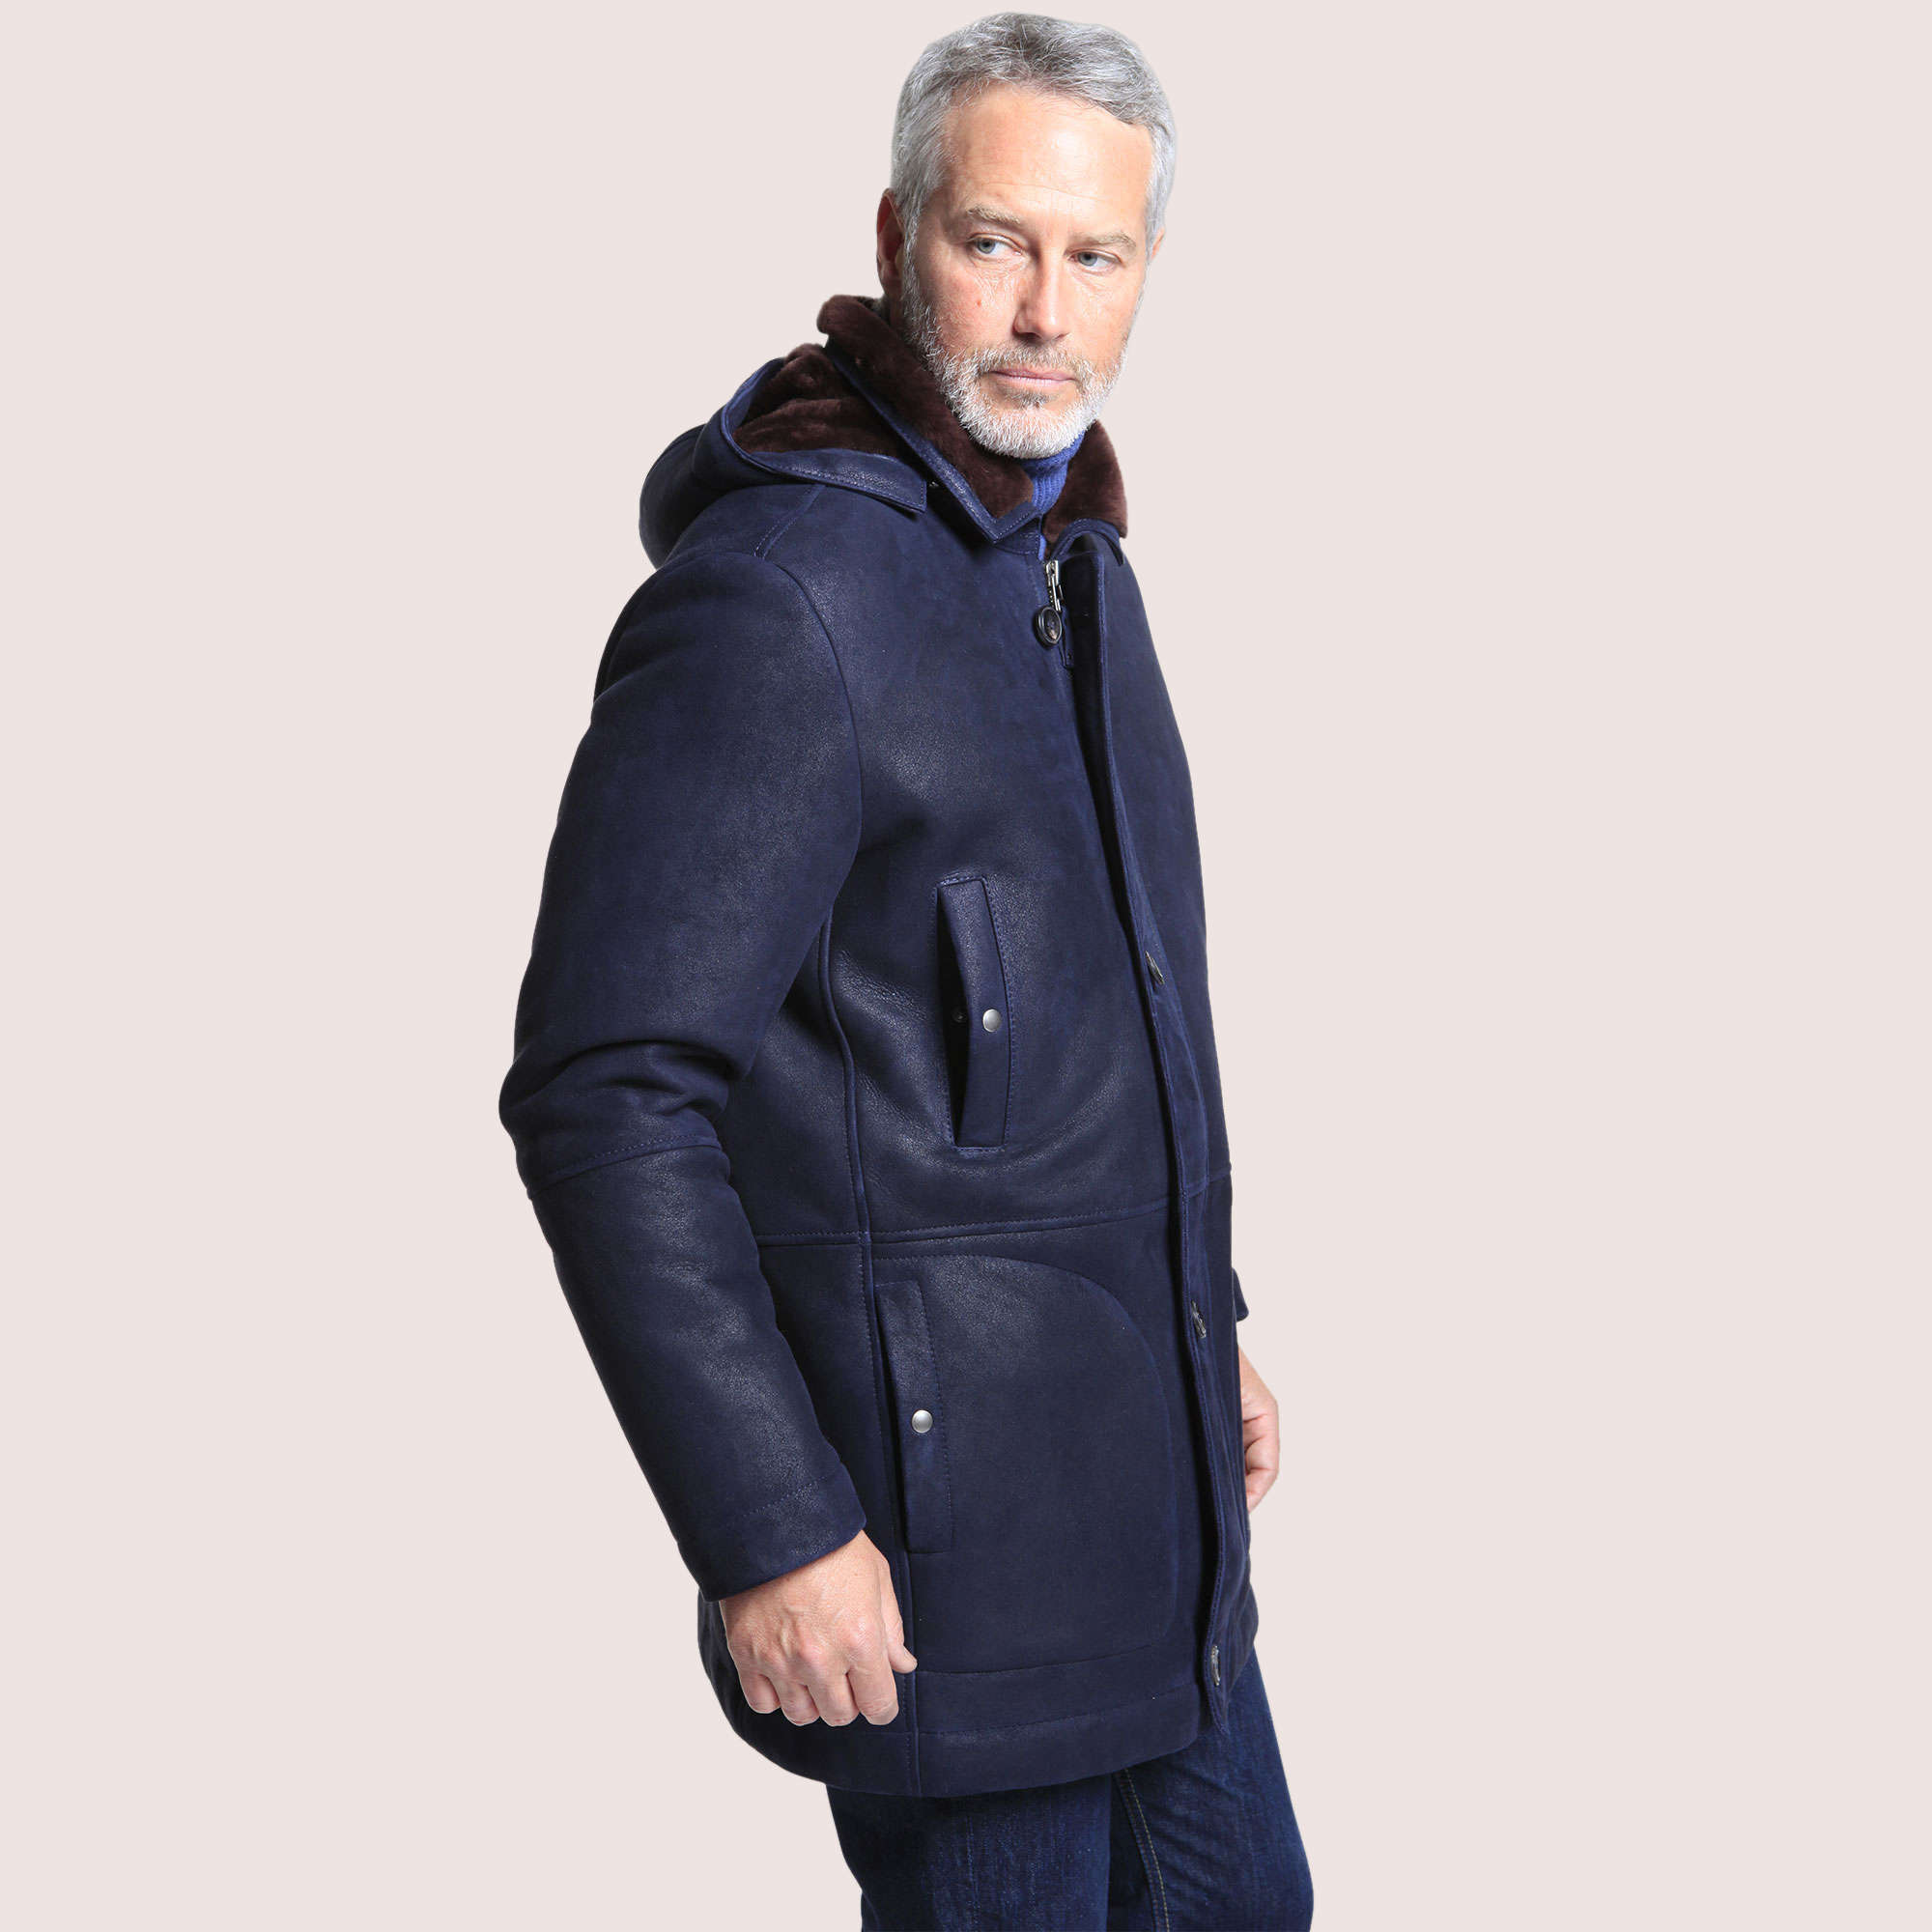 Aston Leather | Rockport Shearling Coat